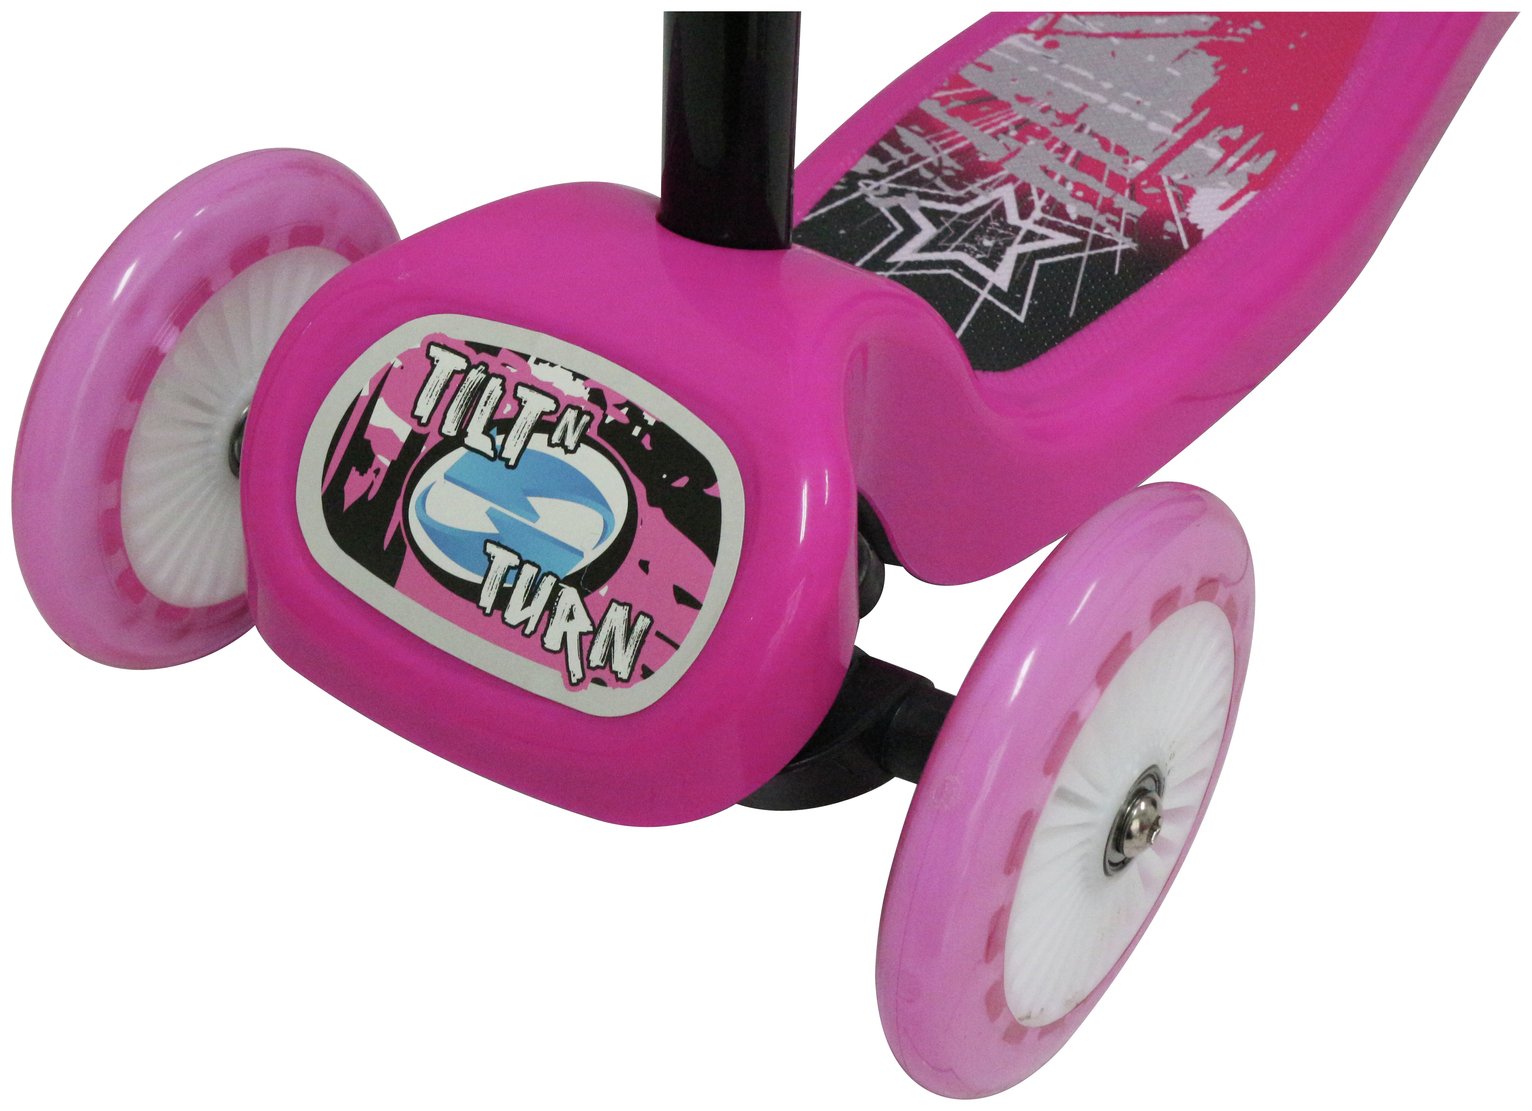 chad valley tilt and turn folding scooter pink